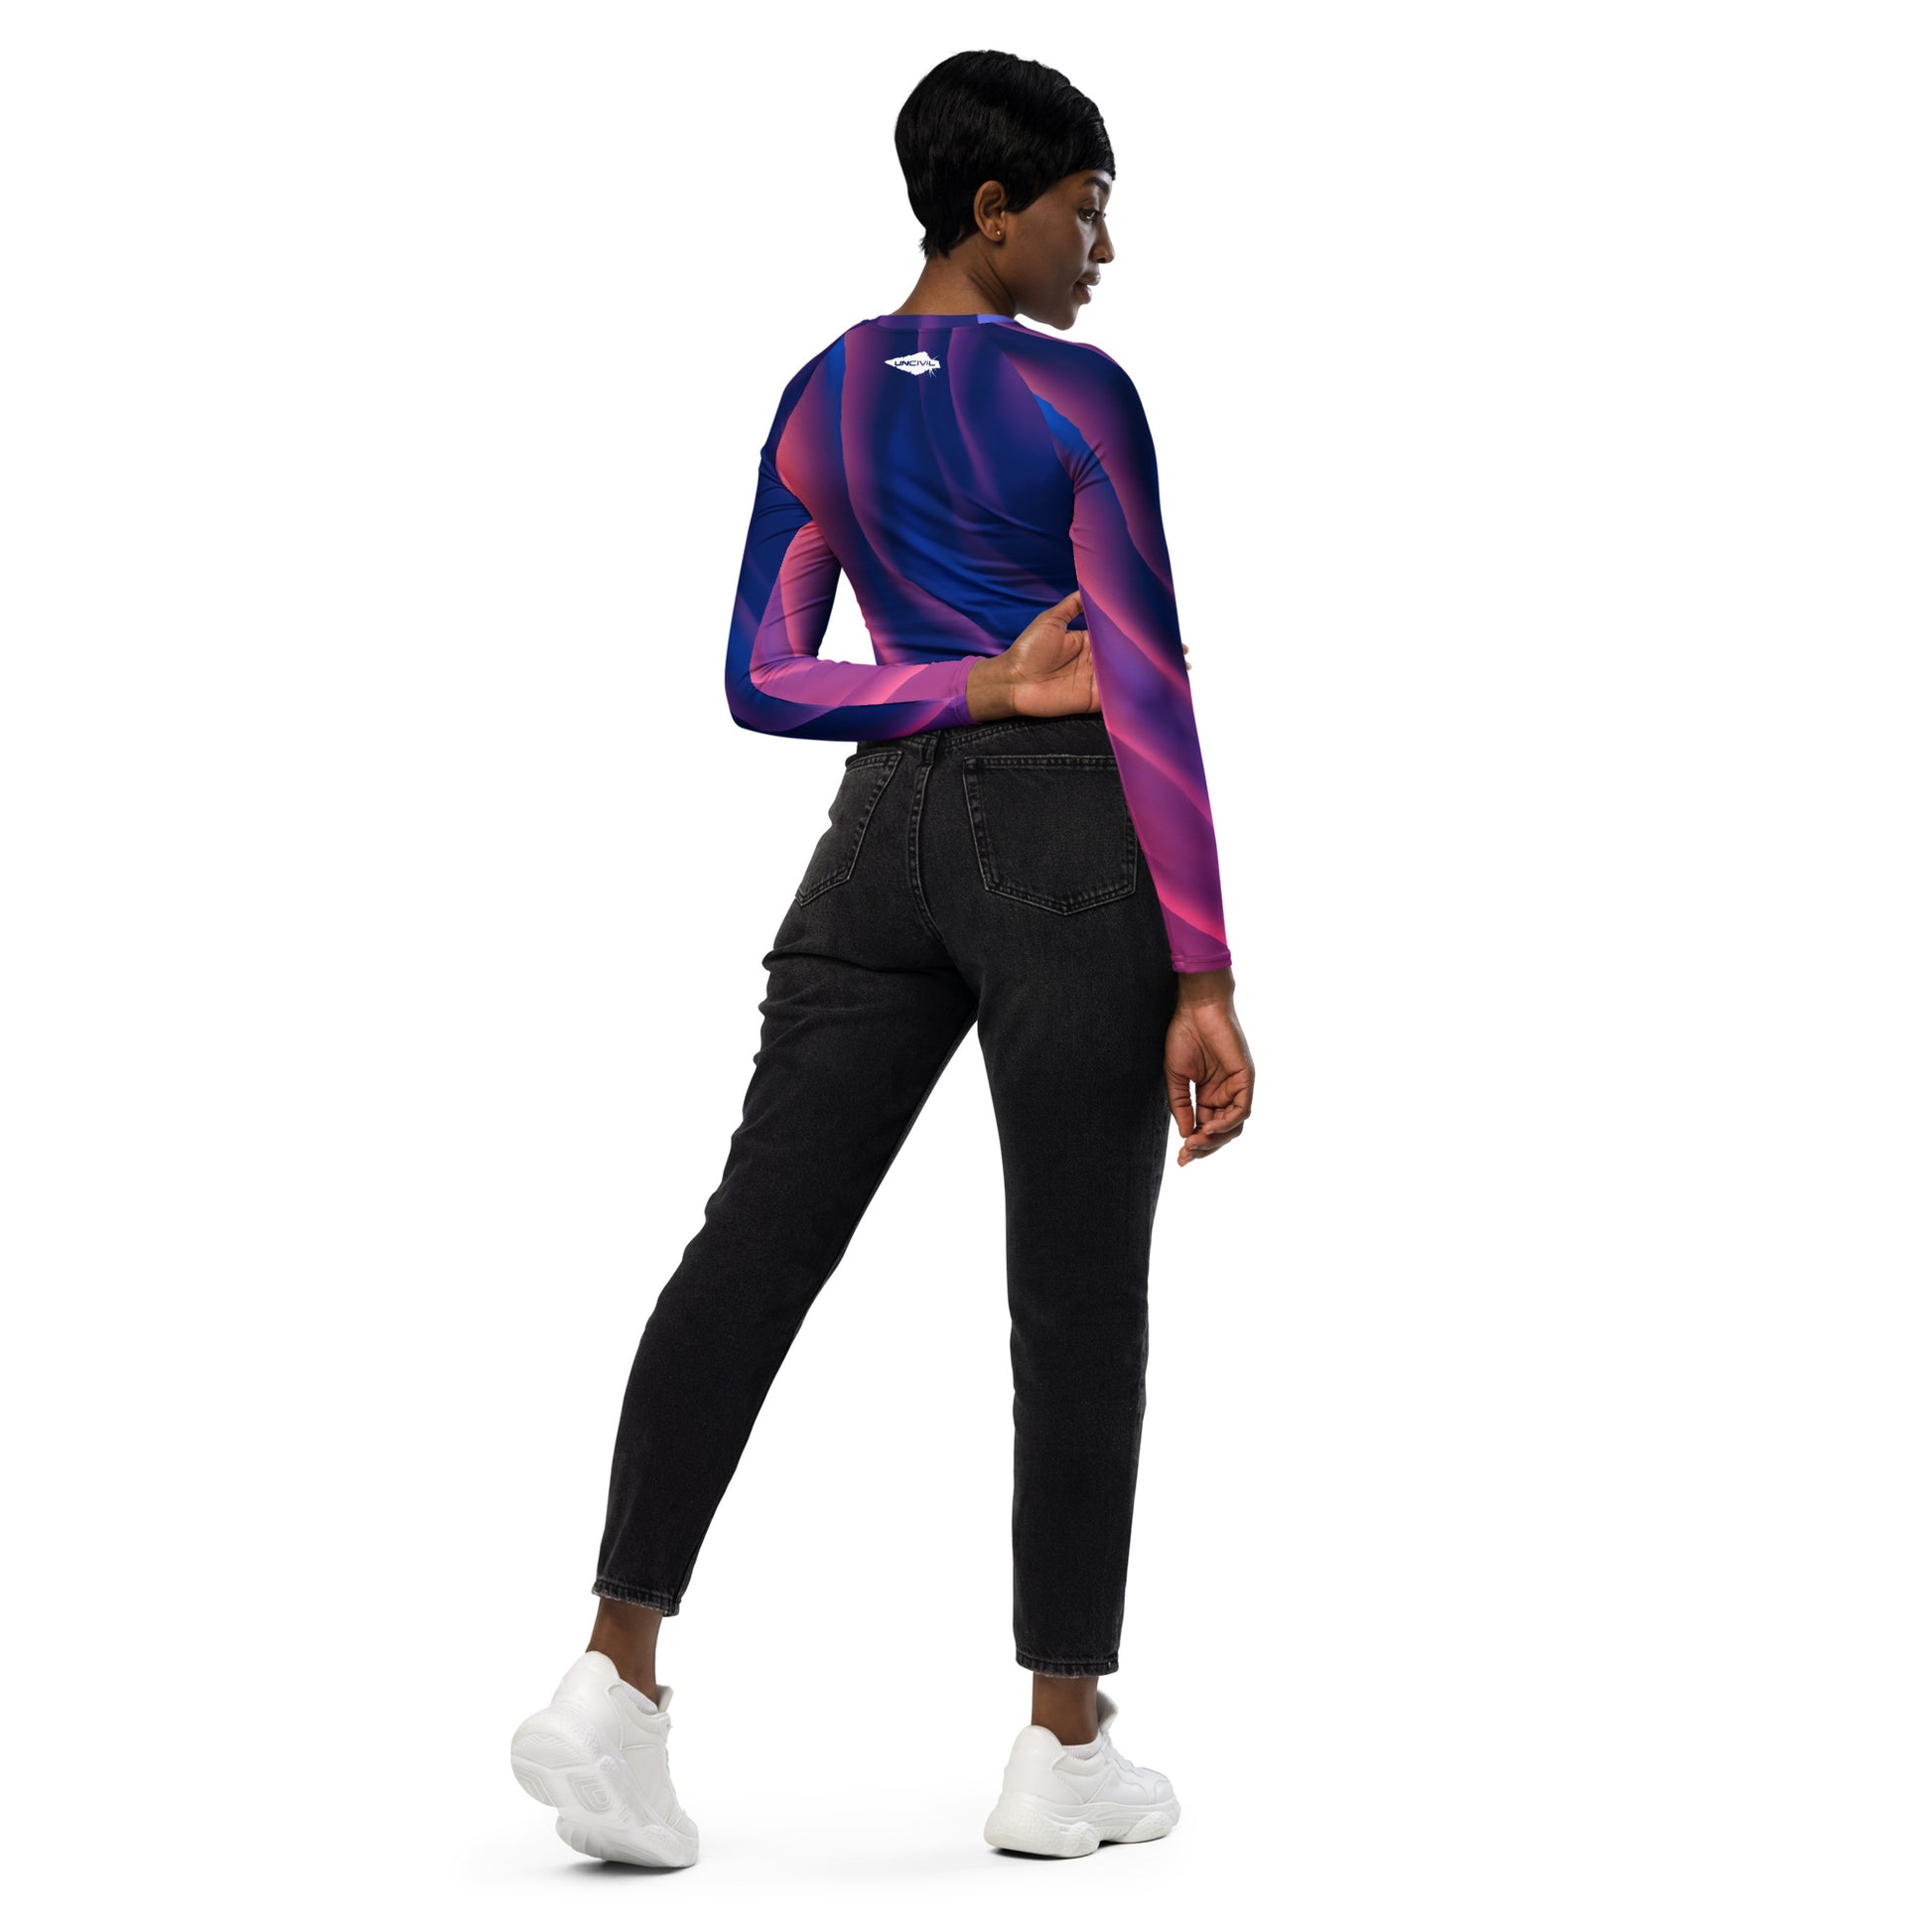 Milky Way long-sleeve crop top for women is made of recycled polyester and elastane, making it an eco-friendly choice for swimming, sports, or athleisure. UPF 50+.